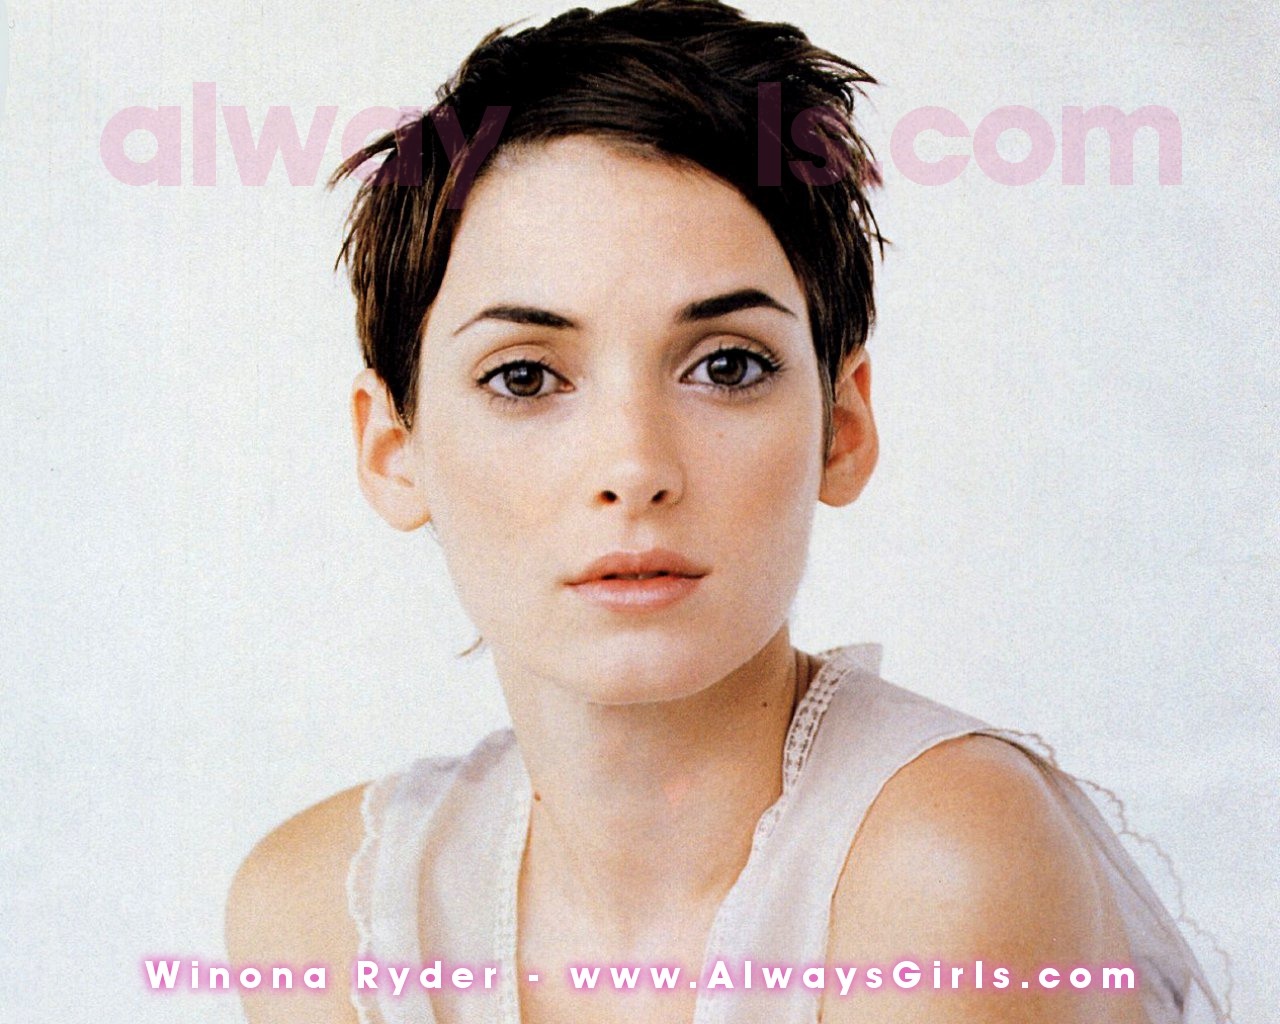 Winona Ryder Wallpaper - Right click your mouse and choose "Set As Background" to